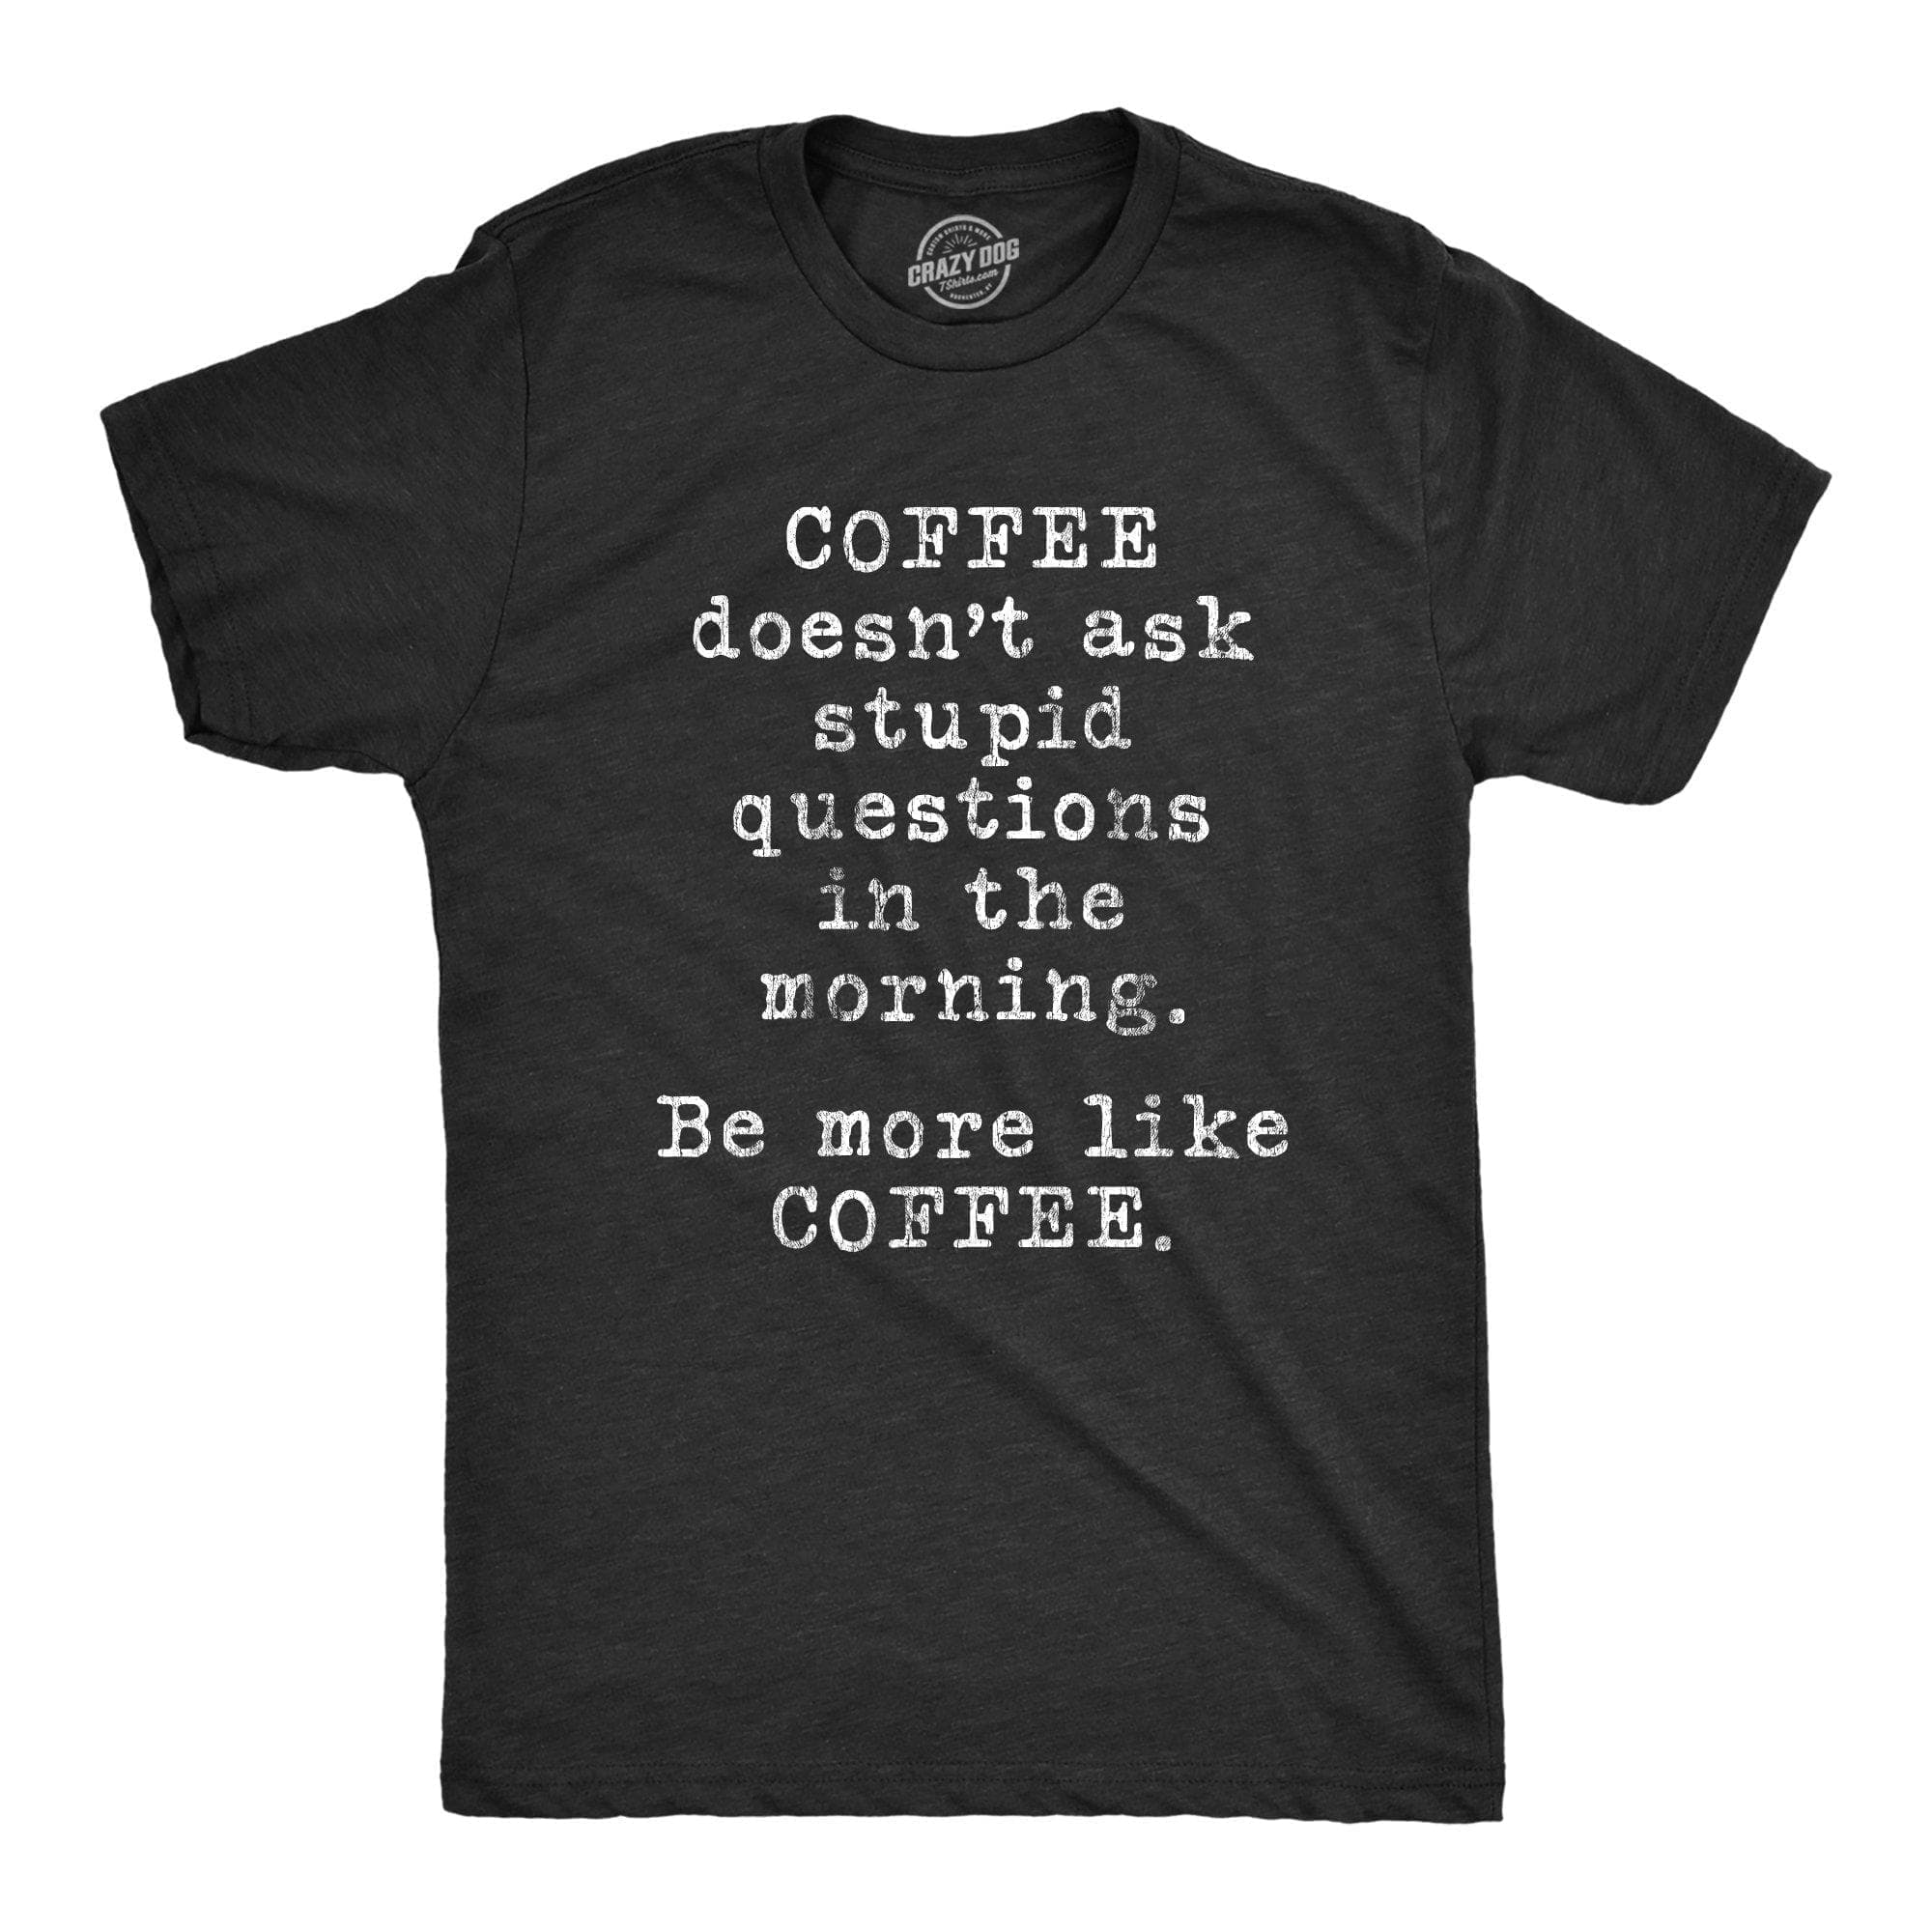 Coffee Doesn't Ask Stupid Questions Men's Tshirt - Crazy Dog T-Shirts